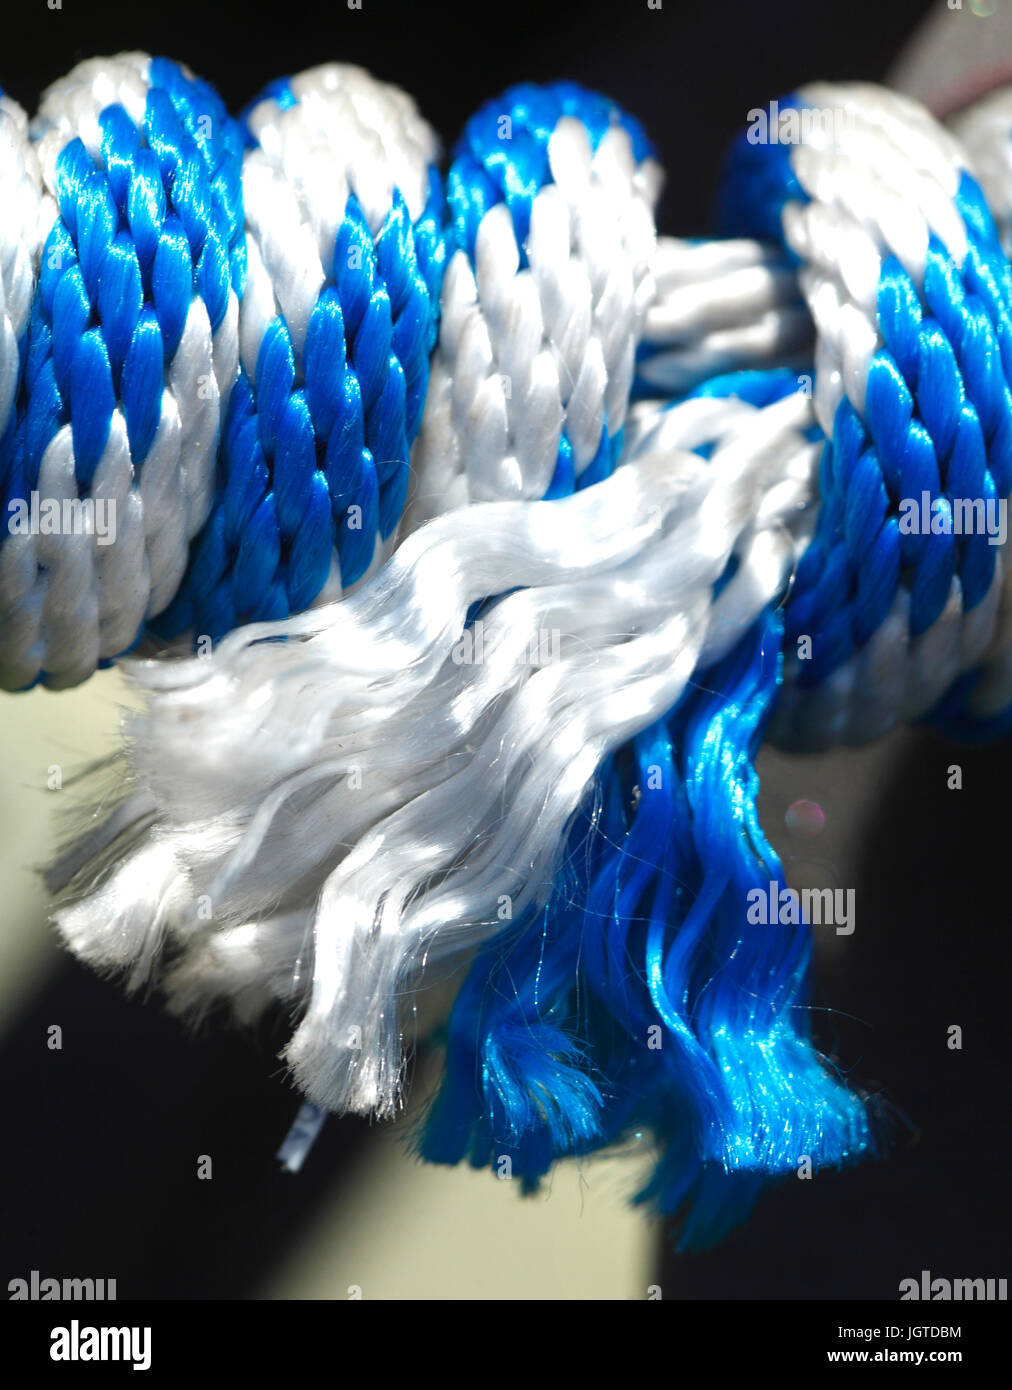 blue white colored rope with knot Stock Photo